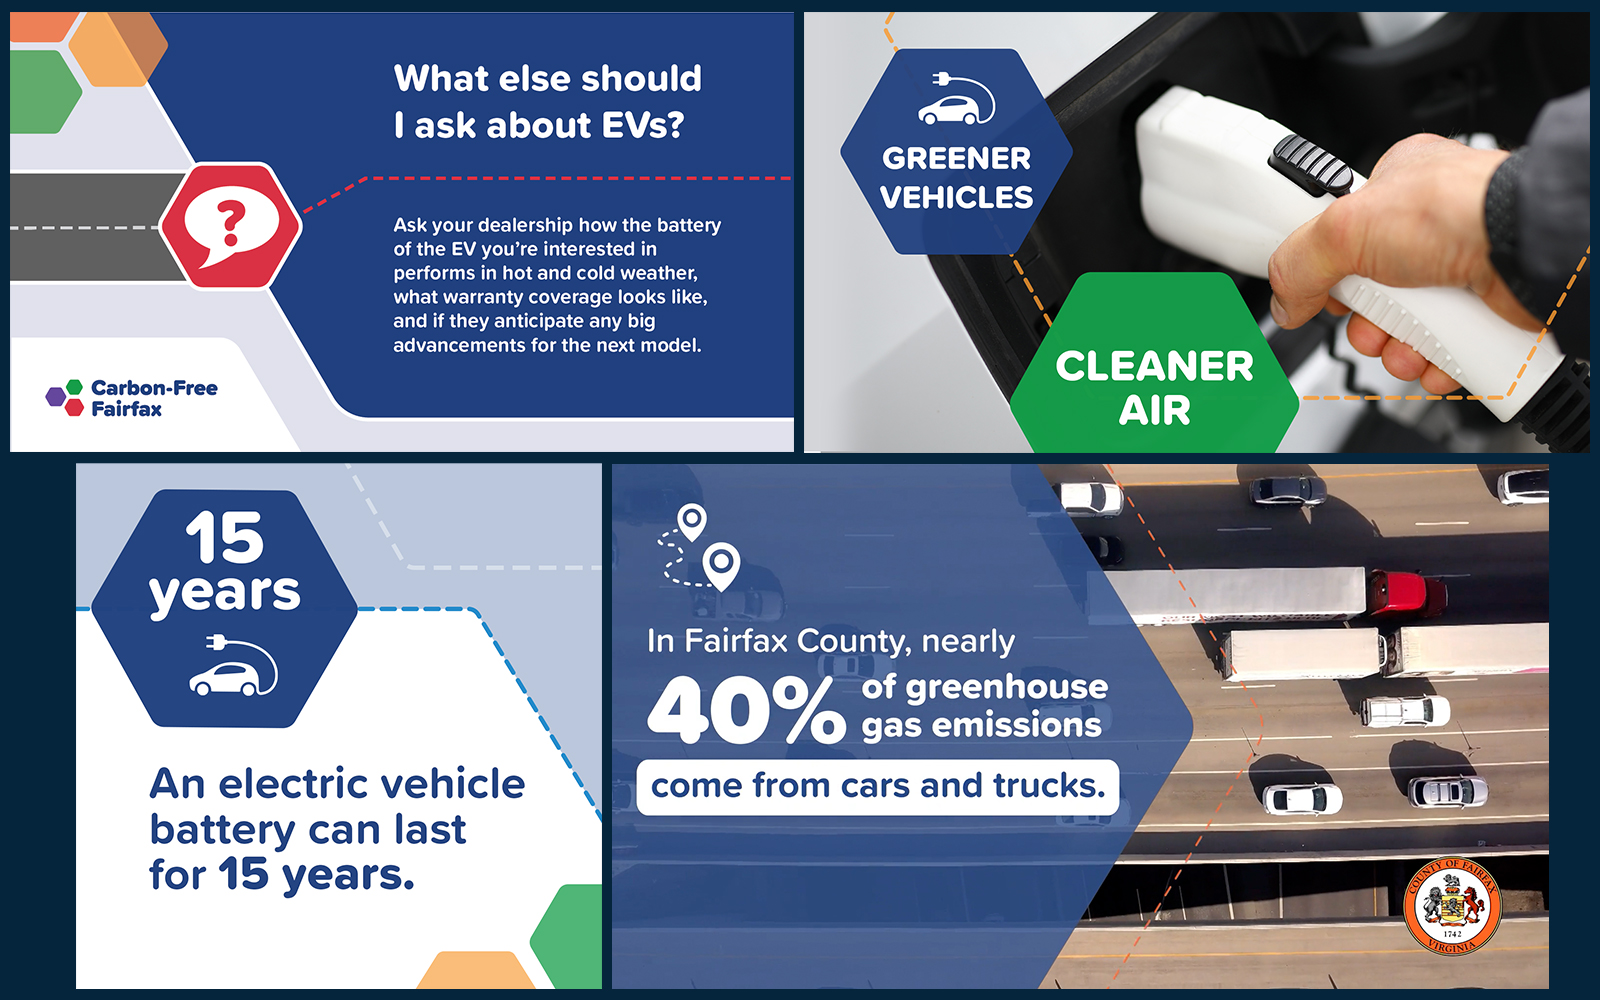 composite image of graphic designs from the carbon-free campaign, showing electric vehicles: An electric vehicle battery can last for 15 years. In Fairfax county, nearly 40% of emissions come from cars and trucks.